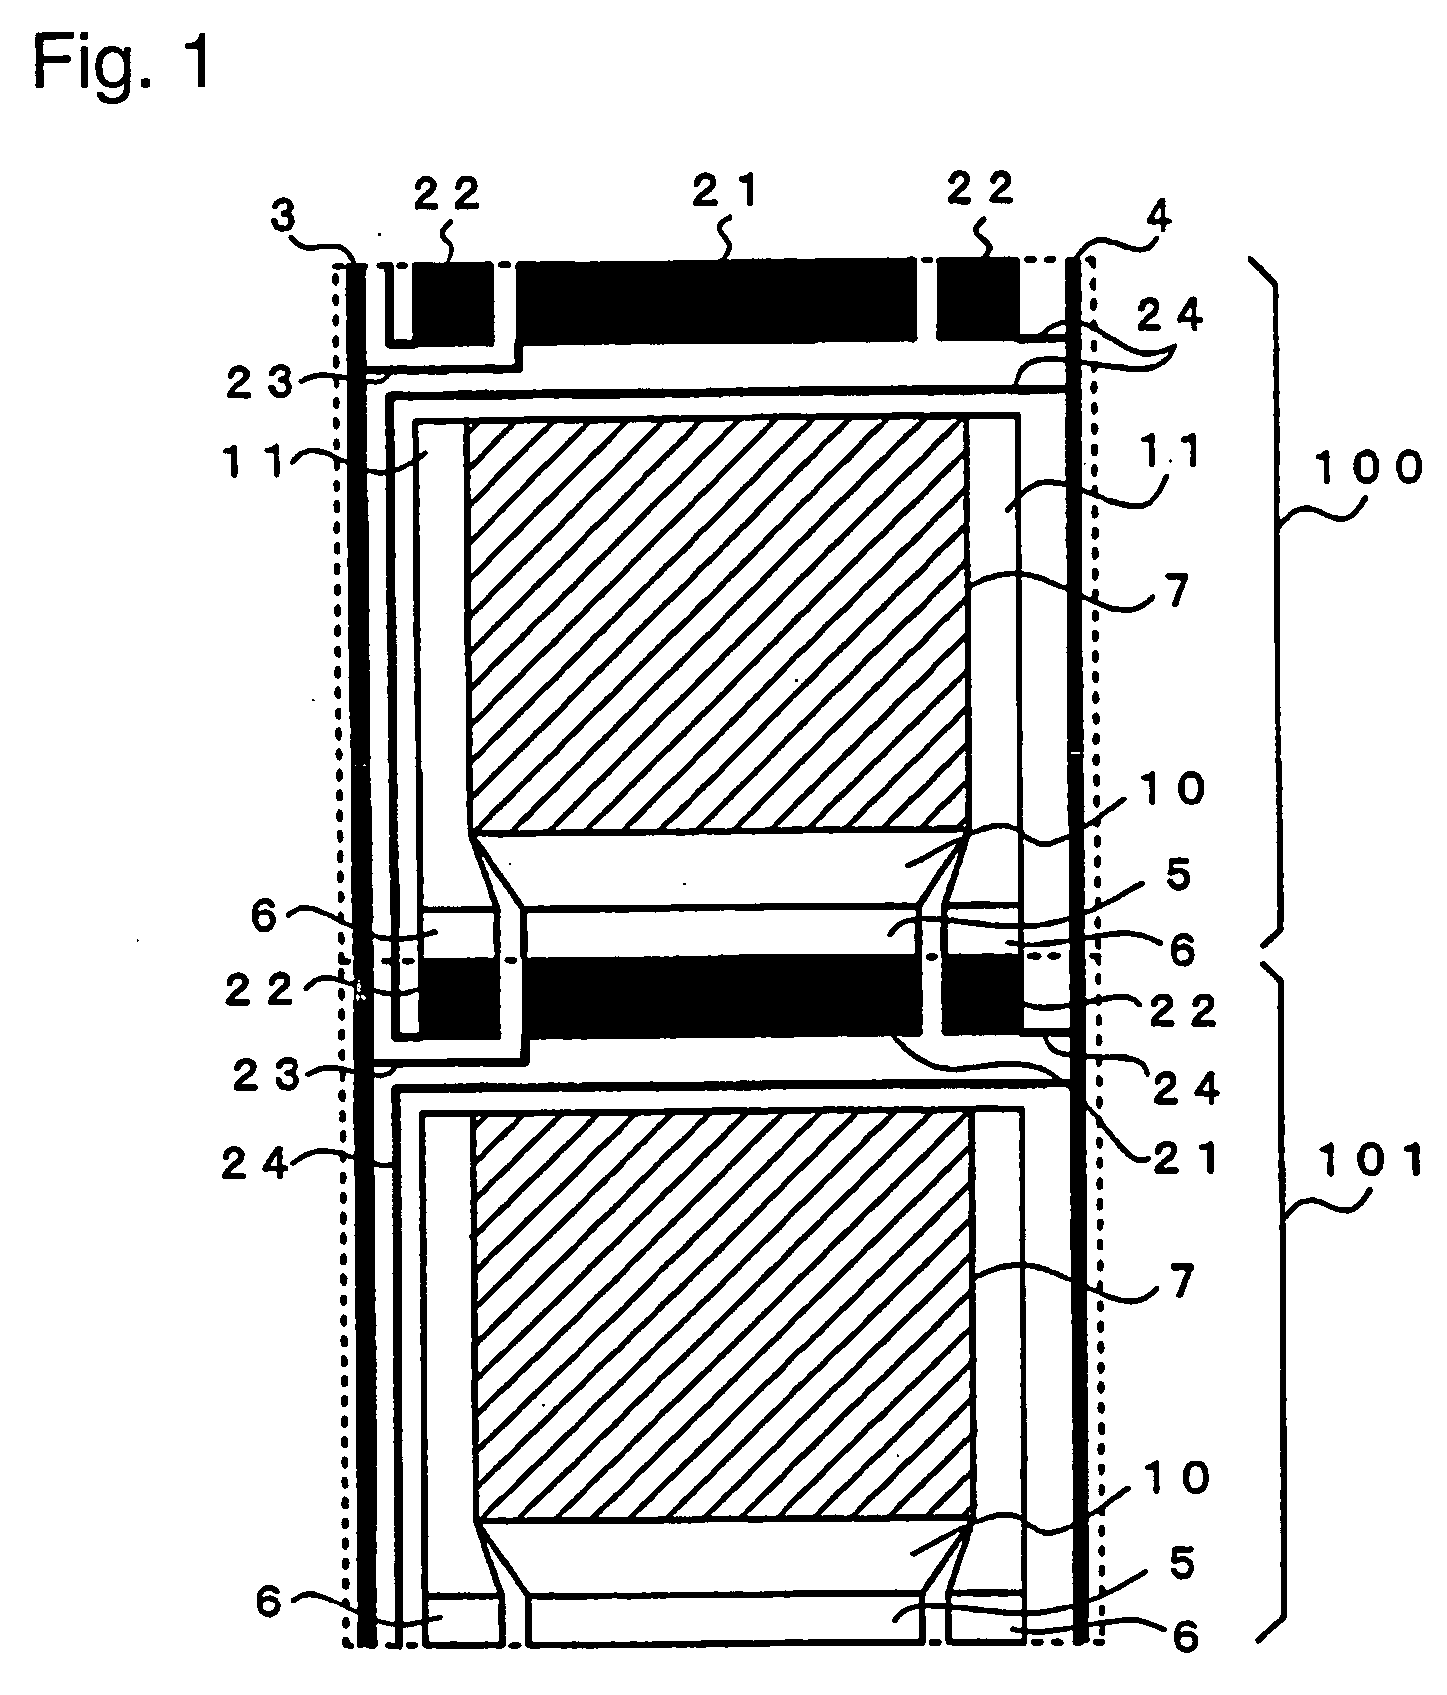 Substrate for organic EL display devices and organic EL display devices